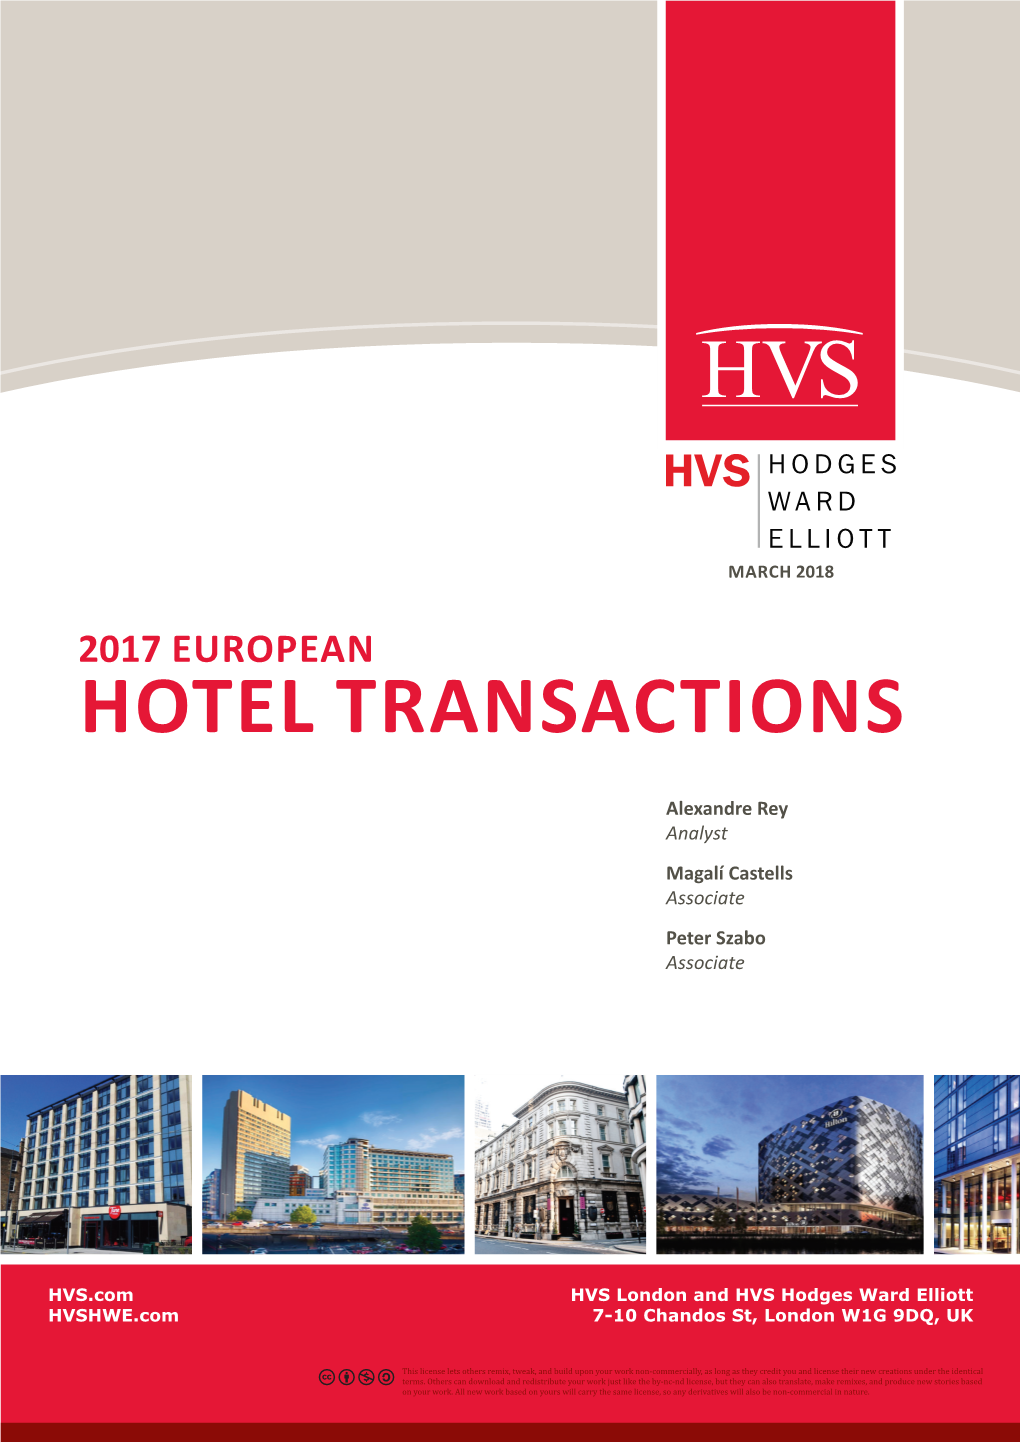 2017 European Hotel Transactions | Page 2 Ch Art 2: REGIONAL SHARE of TRANSACTION VOLUME 2016-17